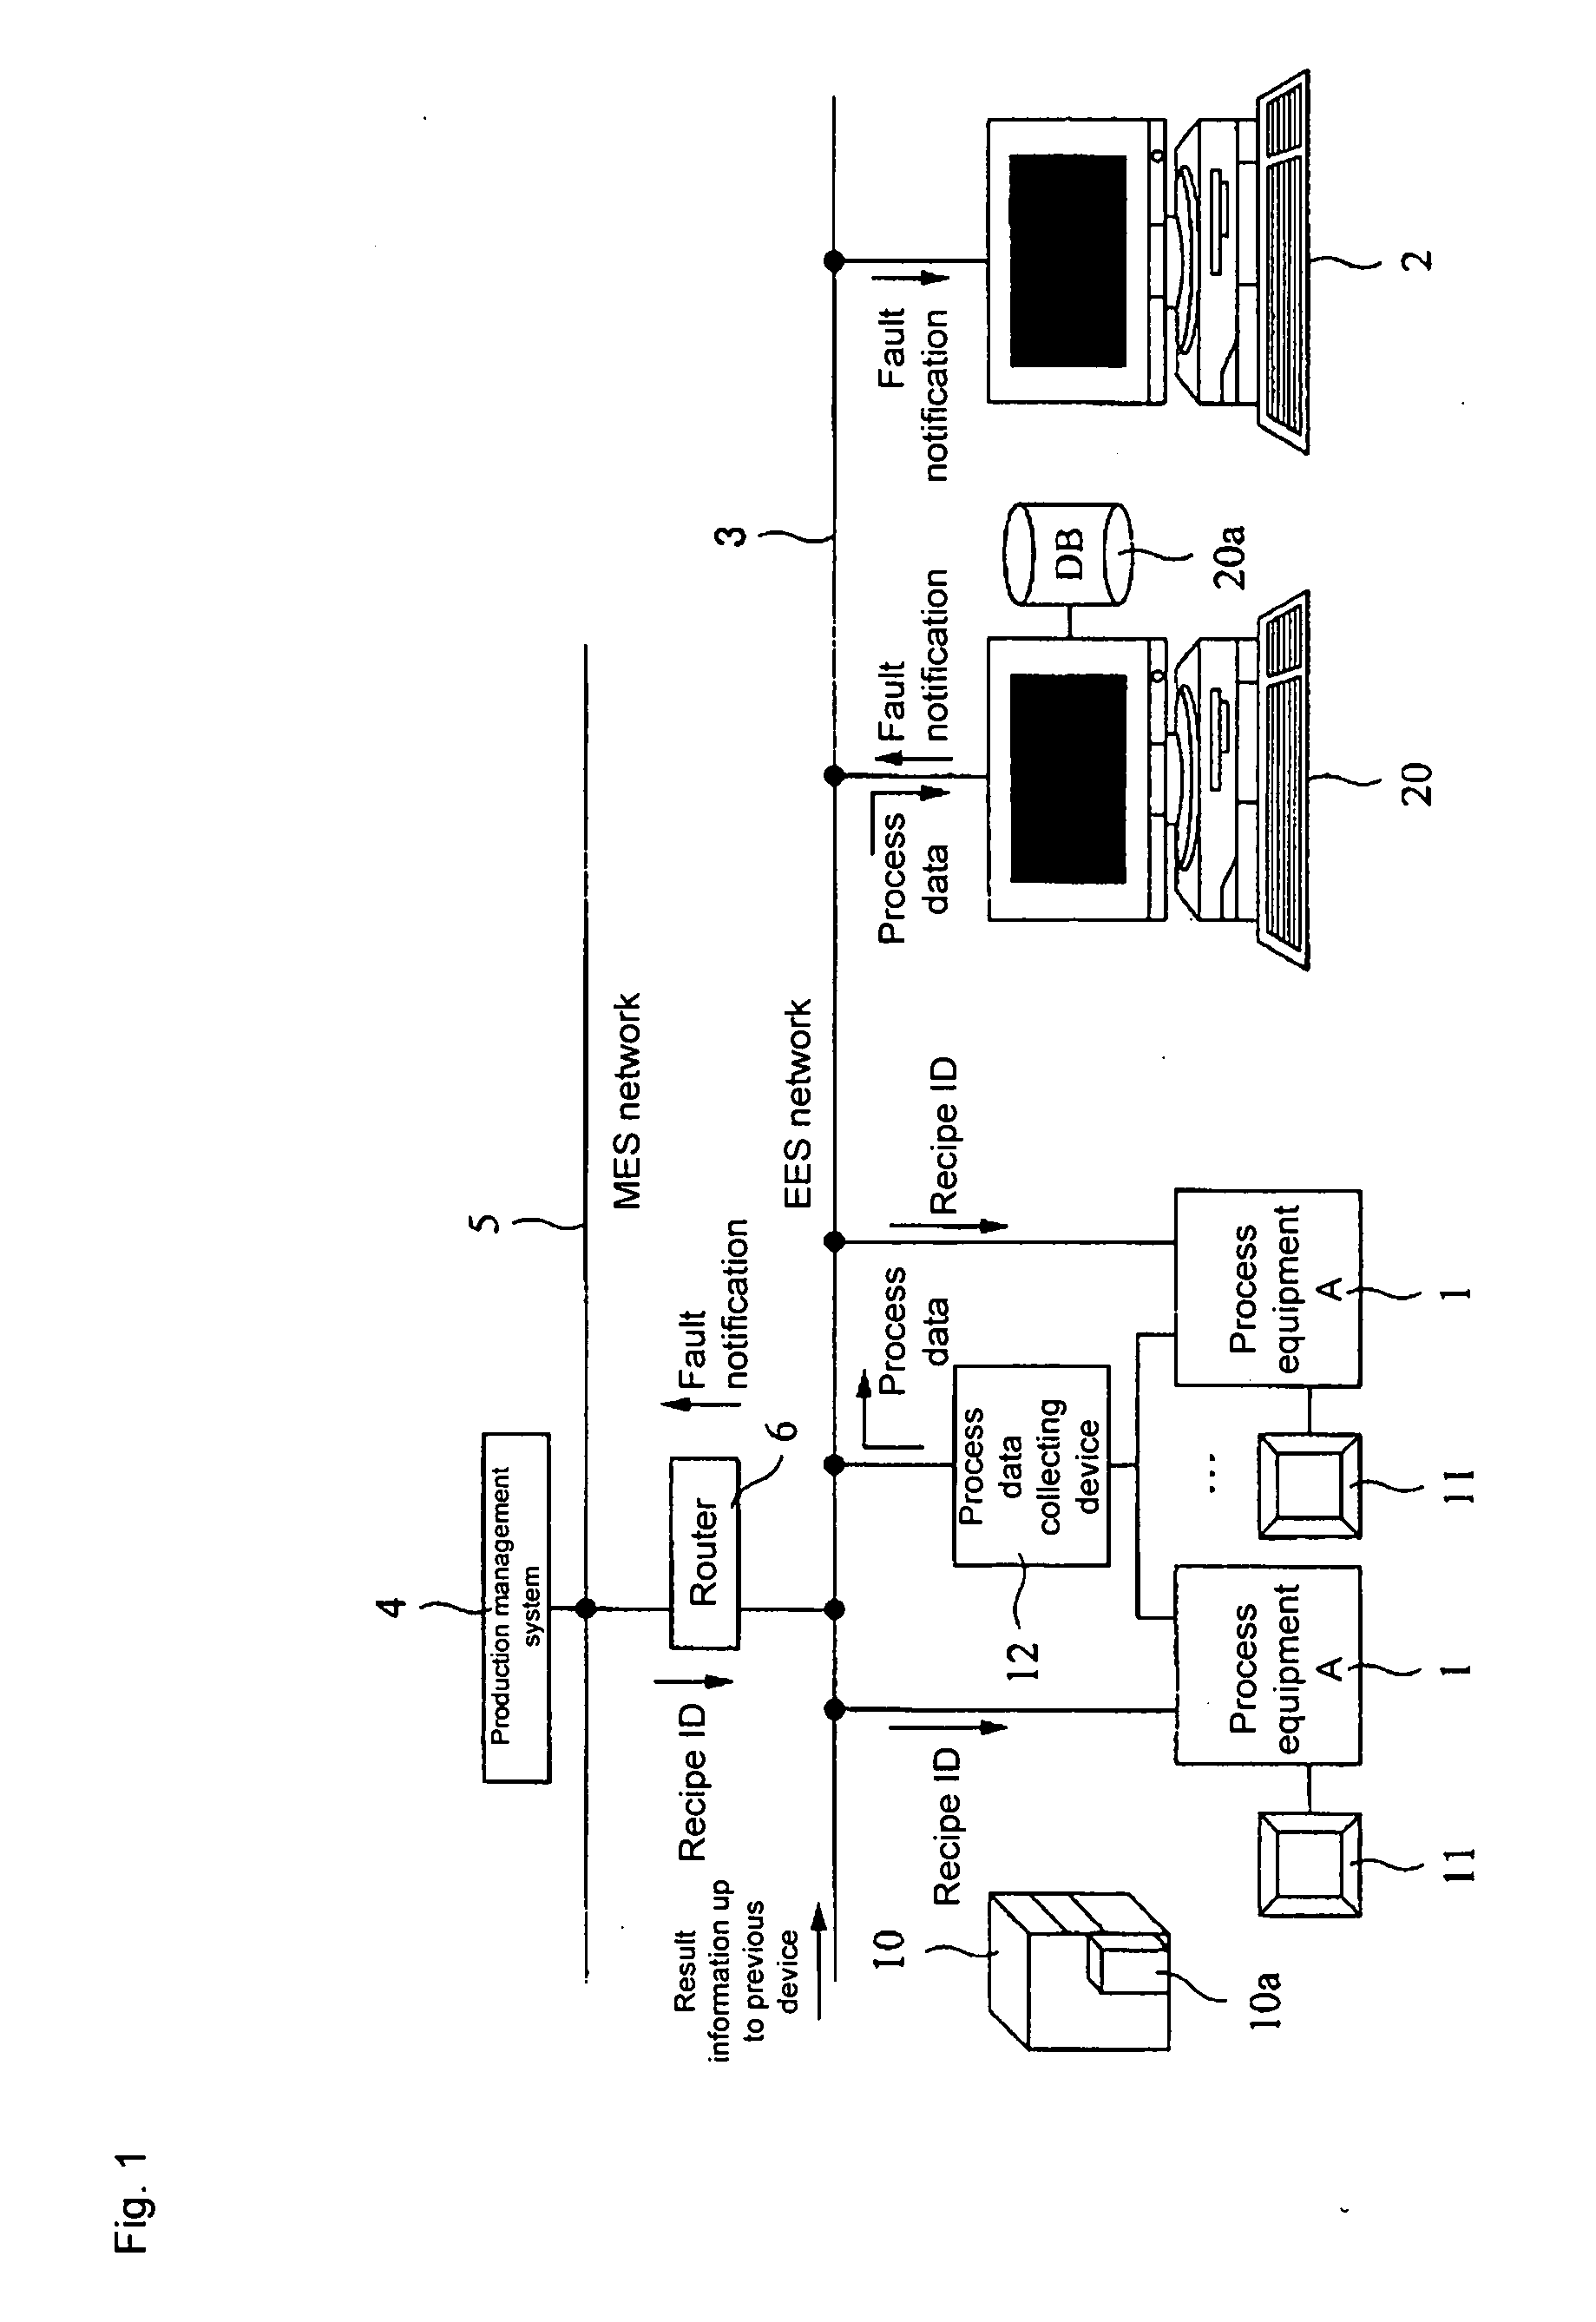 Process fault analyzer and system, program and method thereof